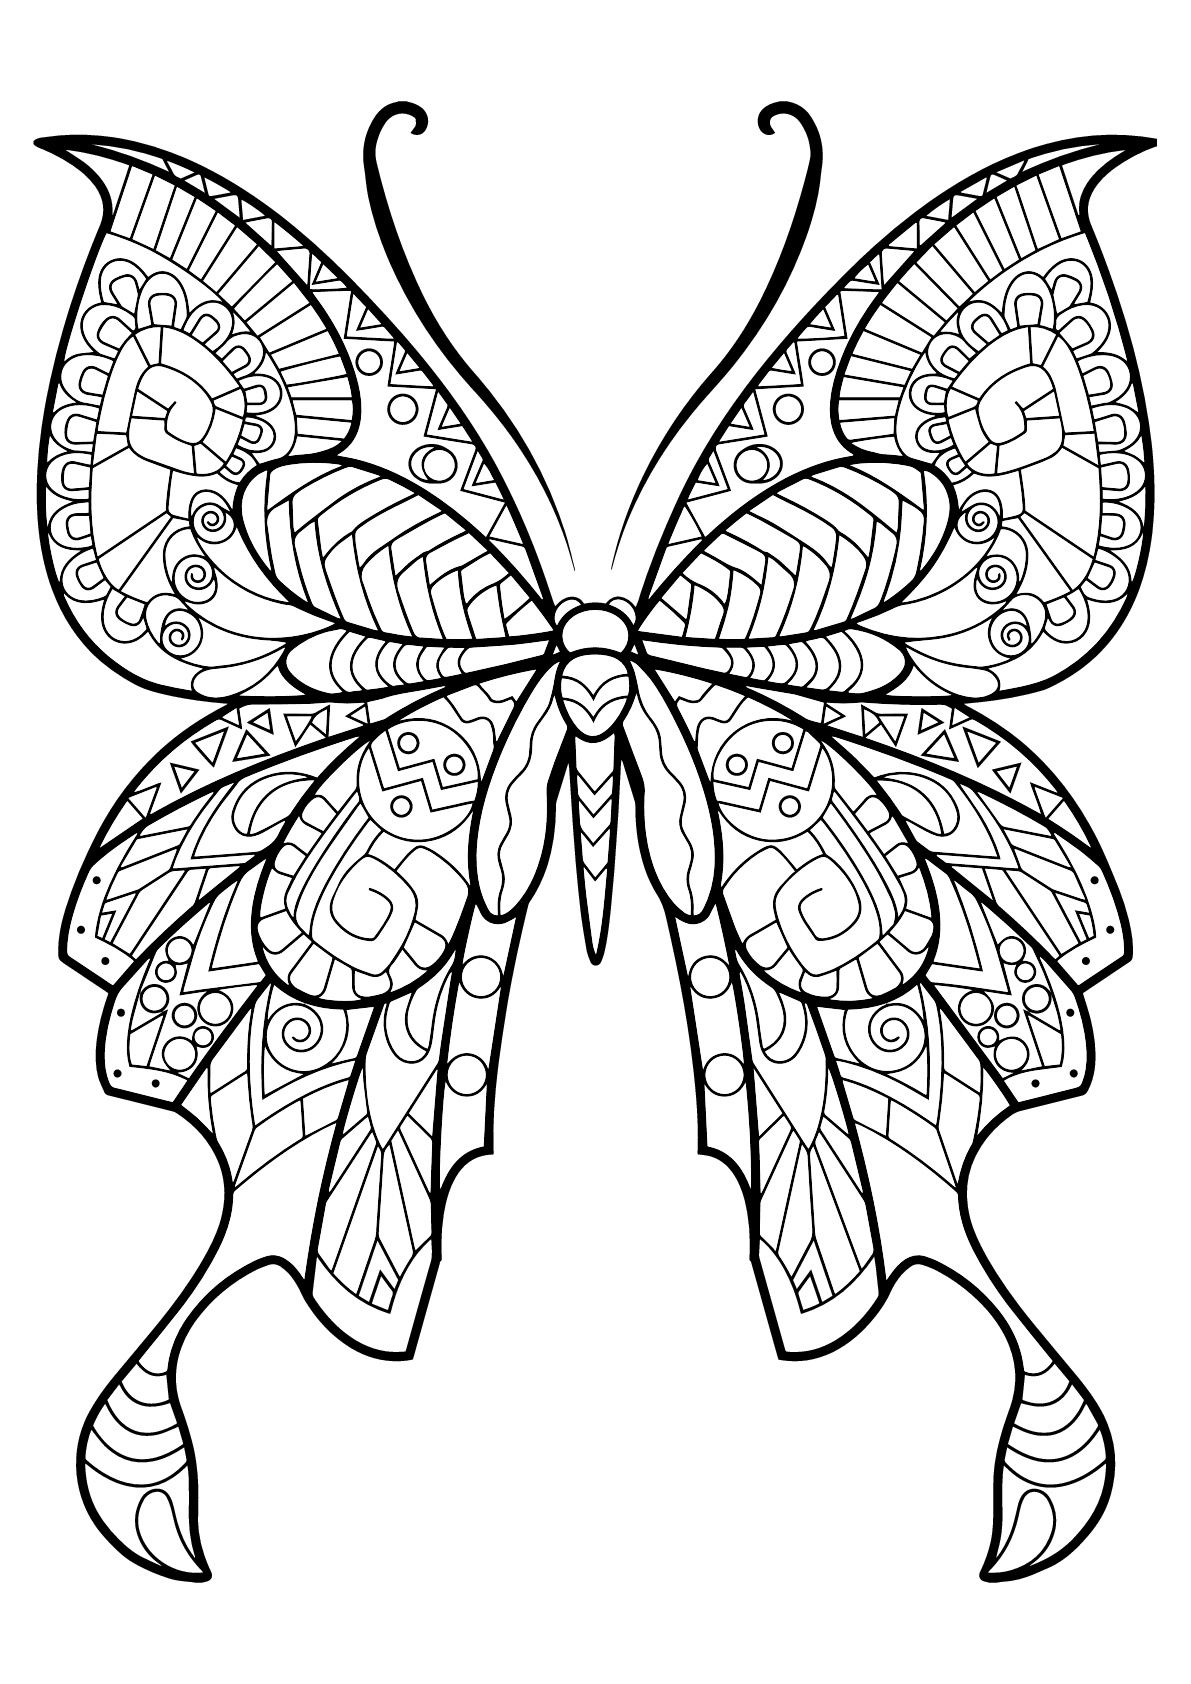 Butterfly beautiful patterns - 8 - Butterflies & insects Adult Coloring ...